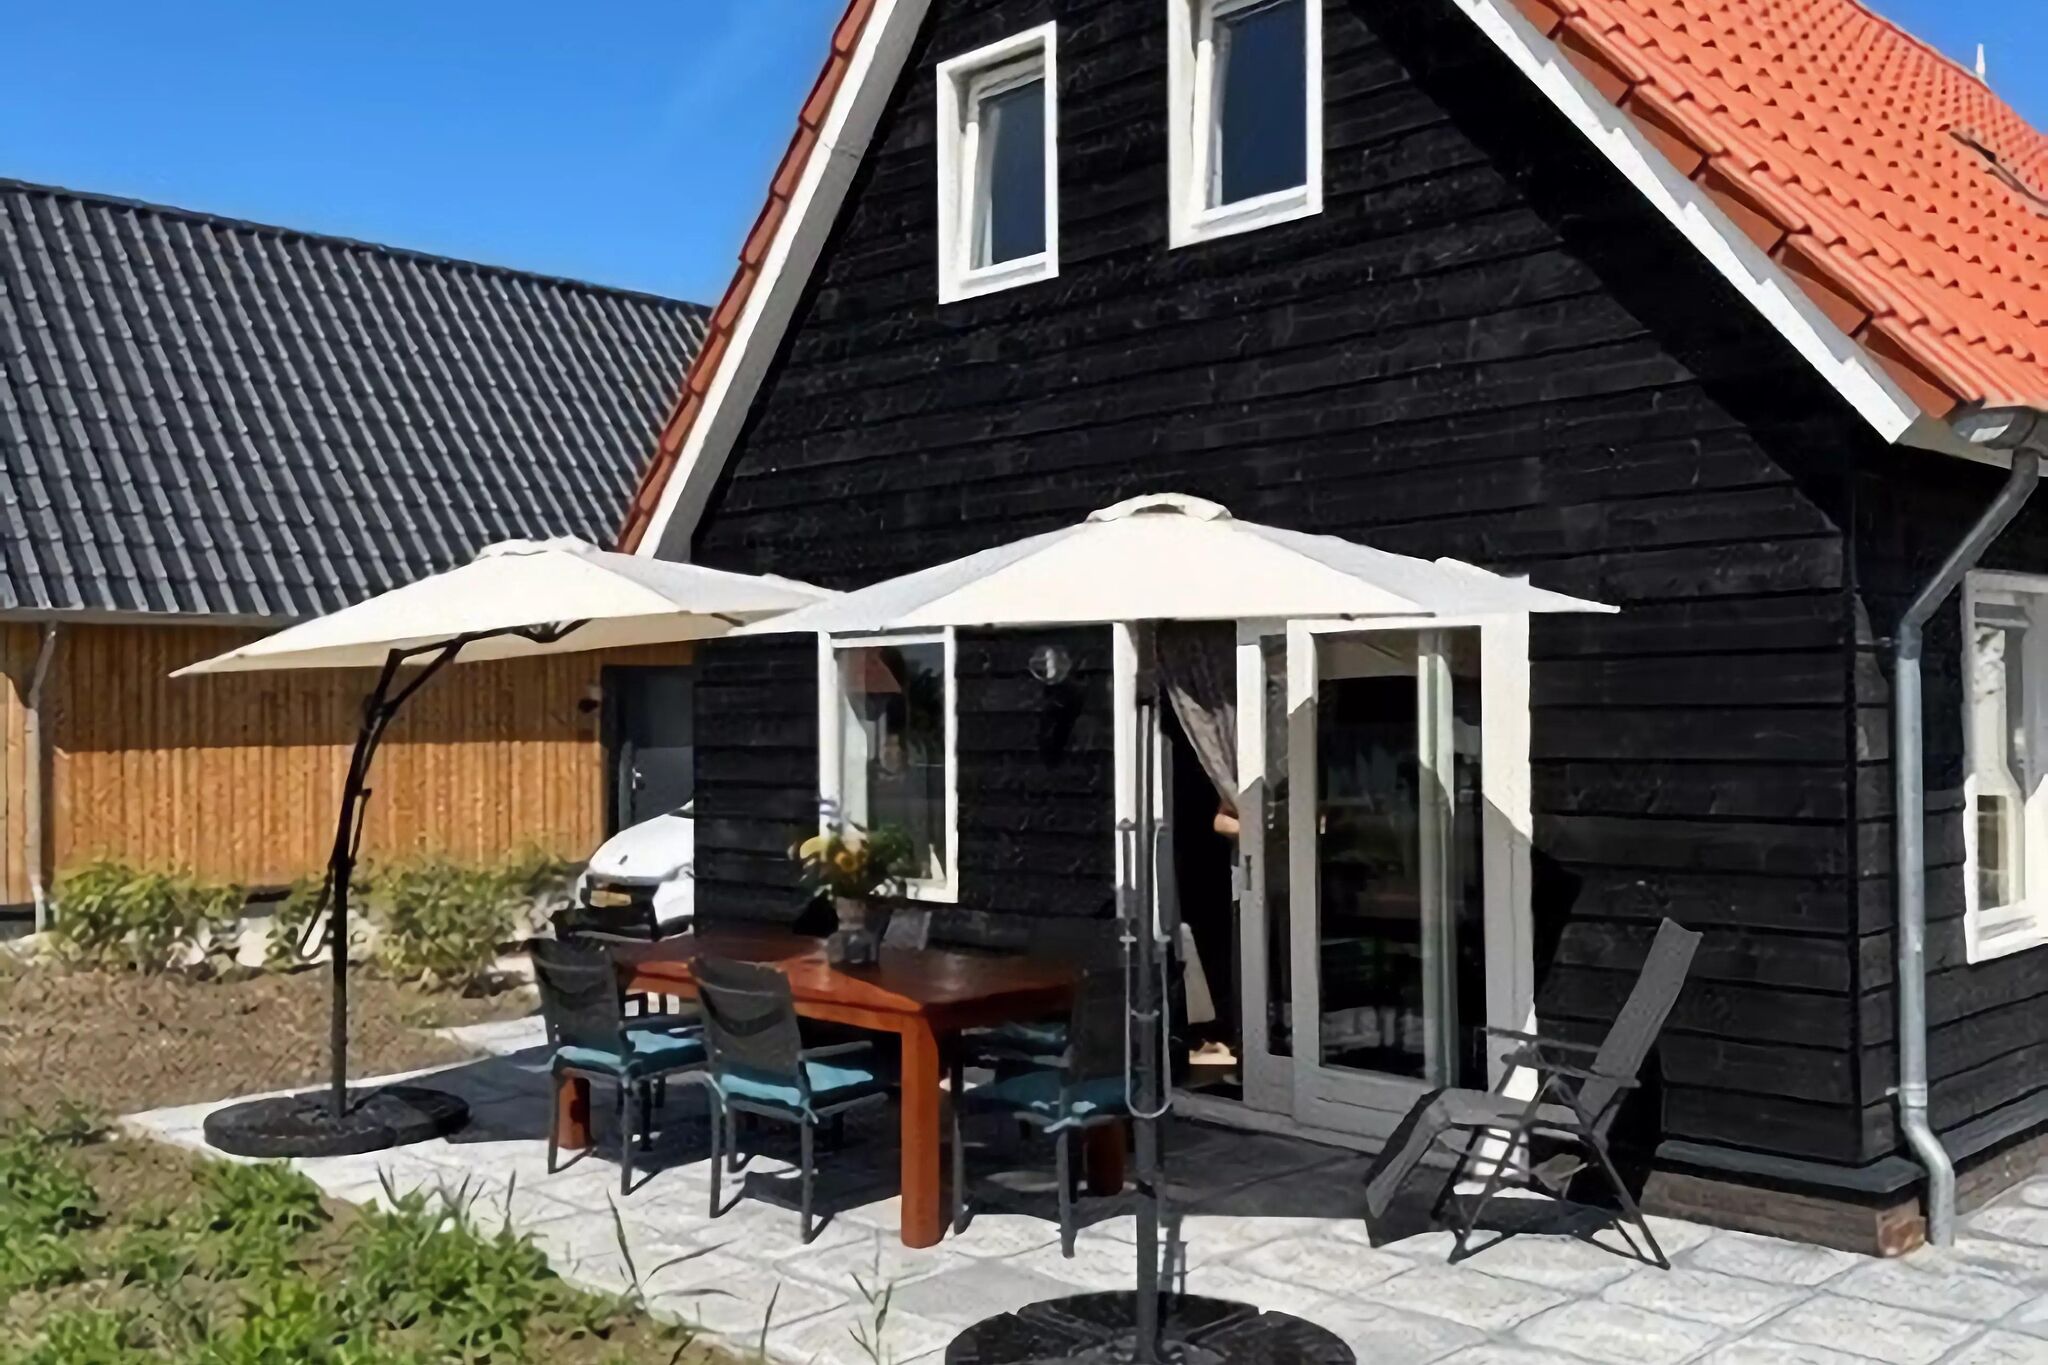 Holiday home near the beach on the Oosterschelde